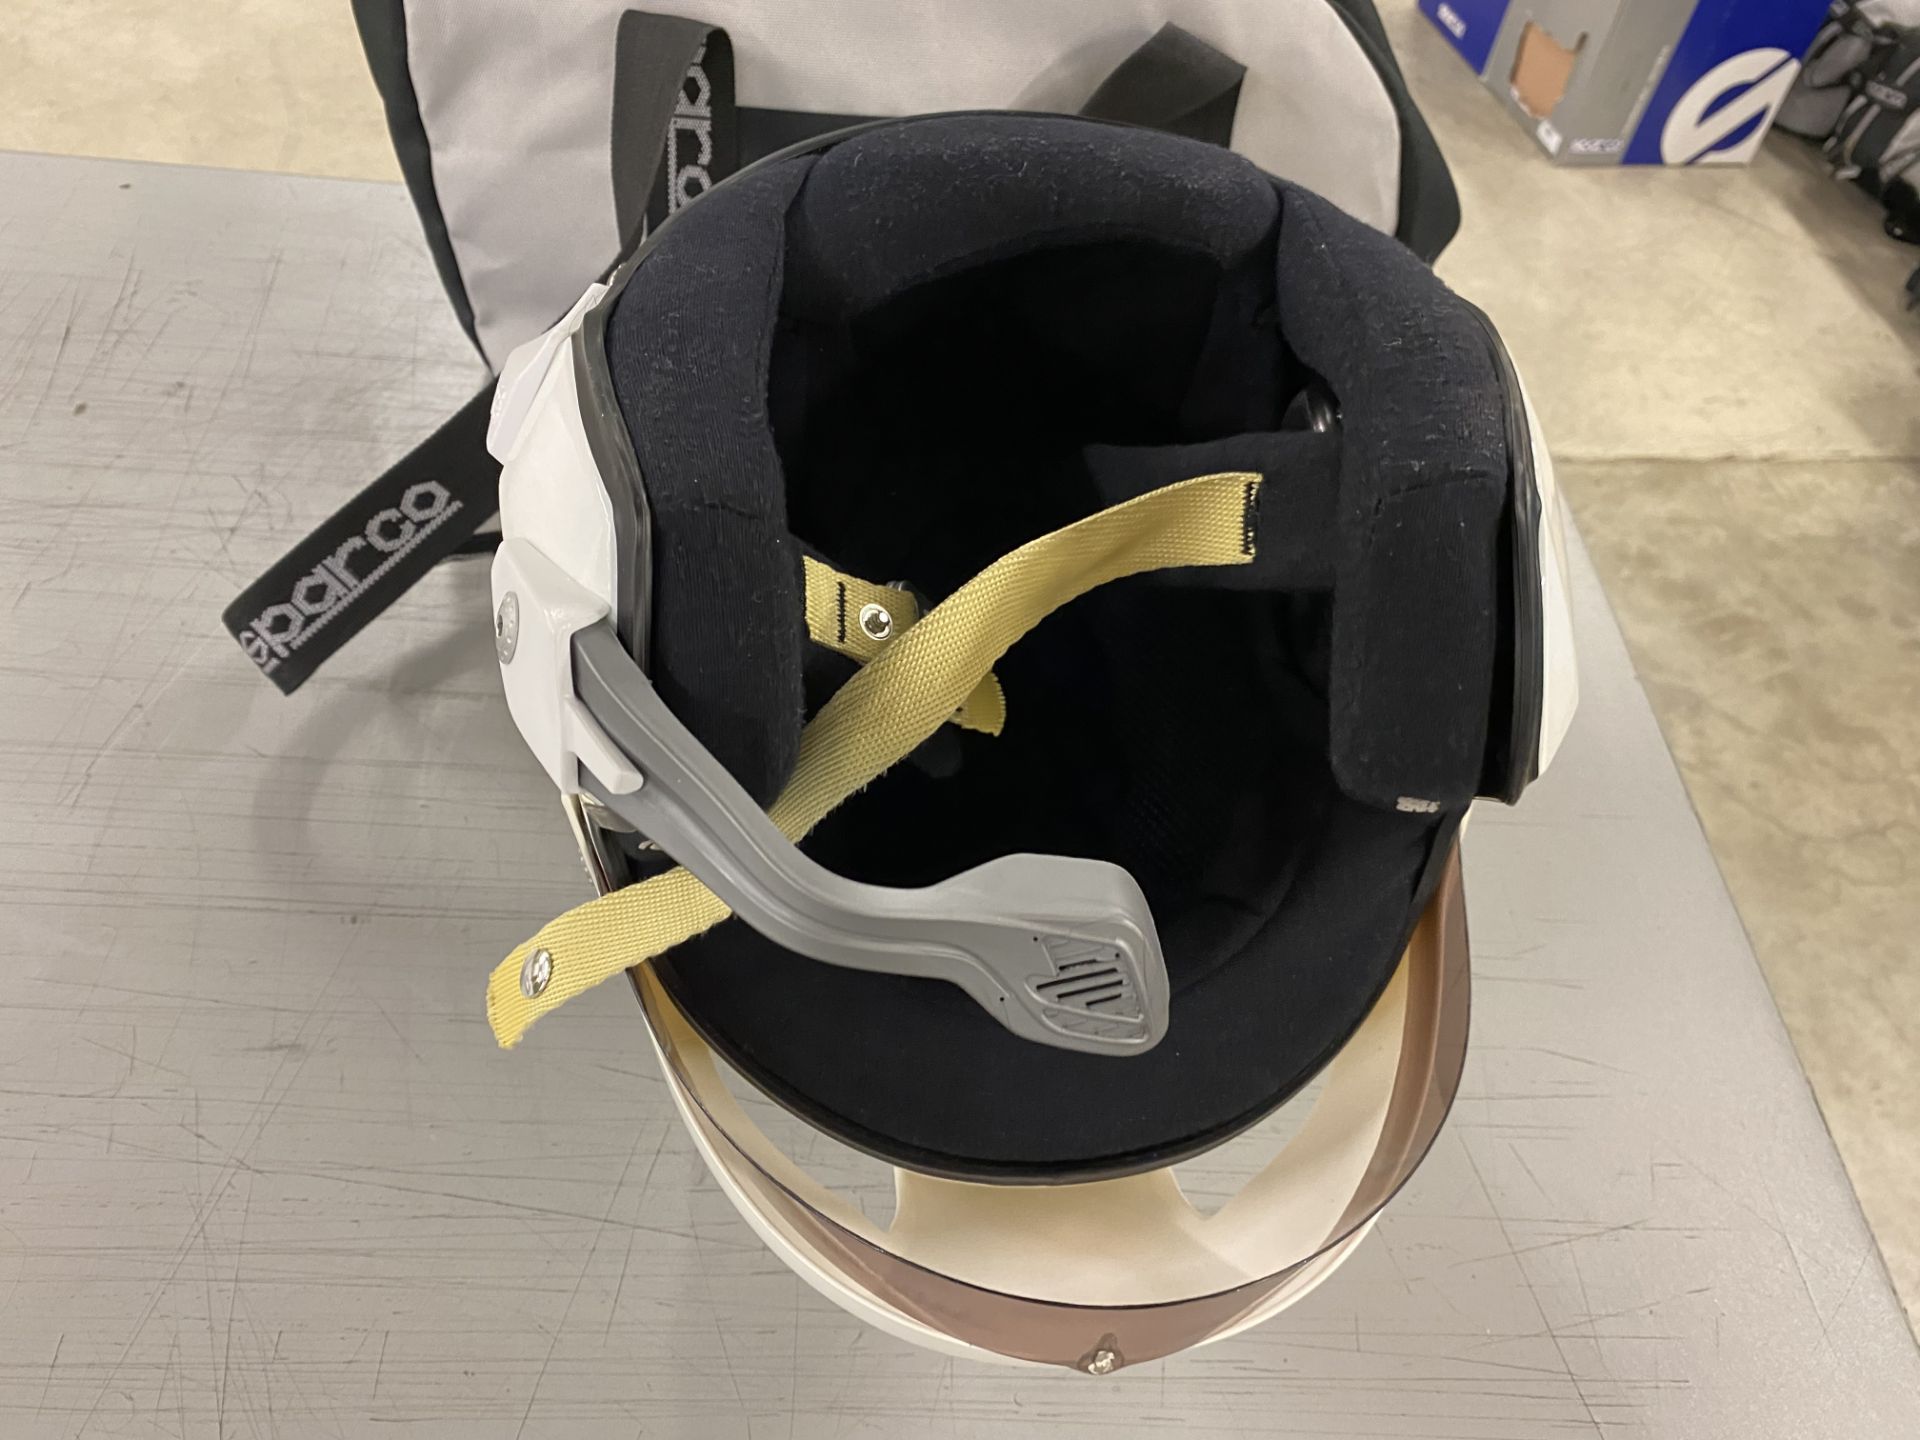 Sparco WTXJ-5i open face racing helmet with microphone and connector with cover and storage bag size - Image 3 of 4